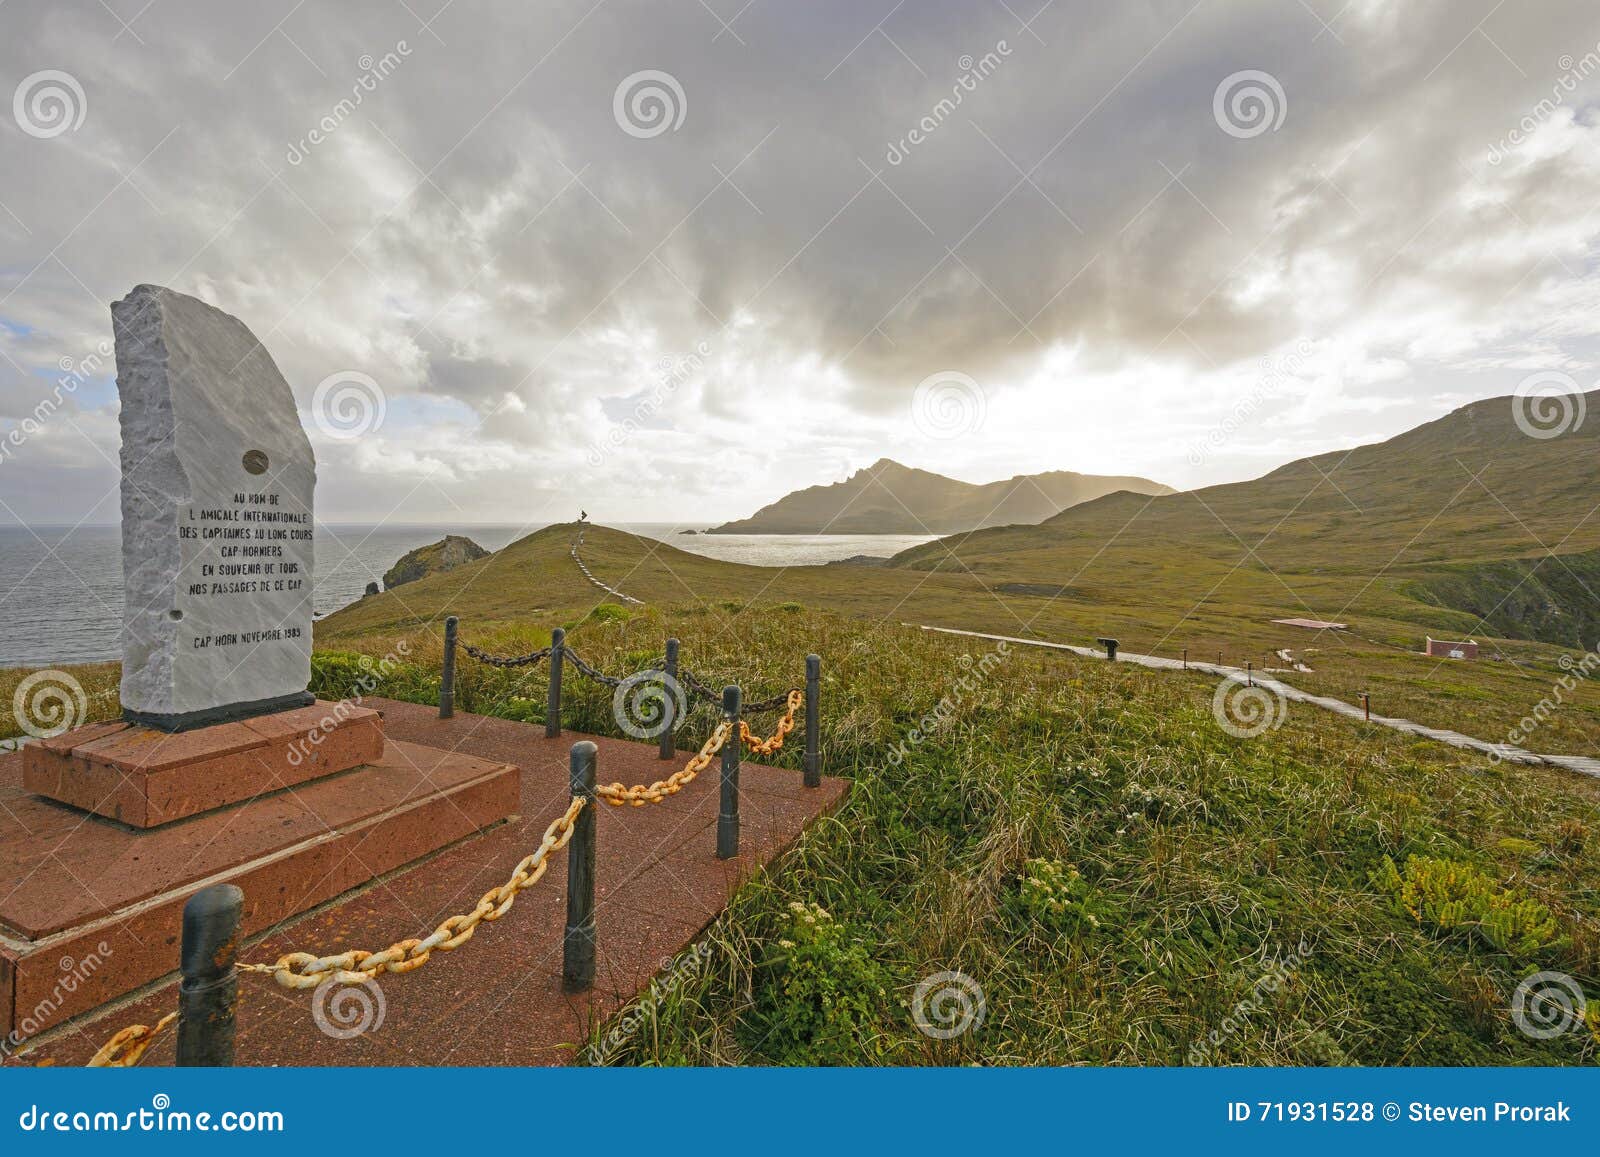 cape horn monument and dedication stone